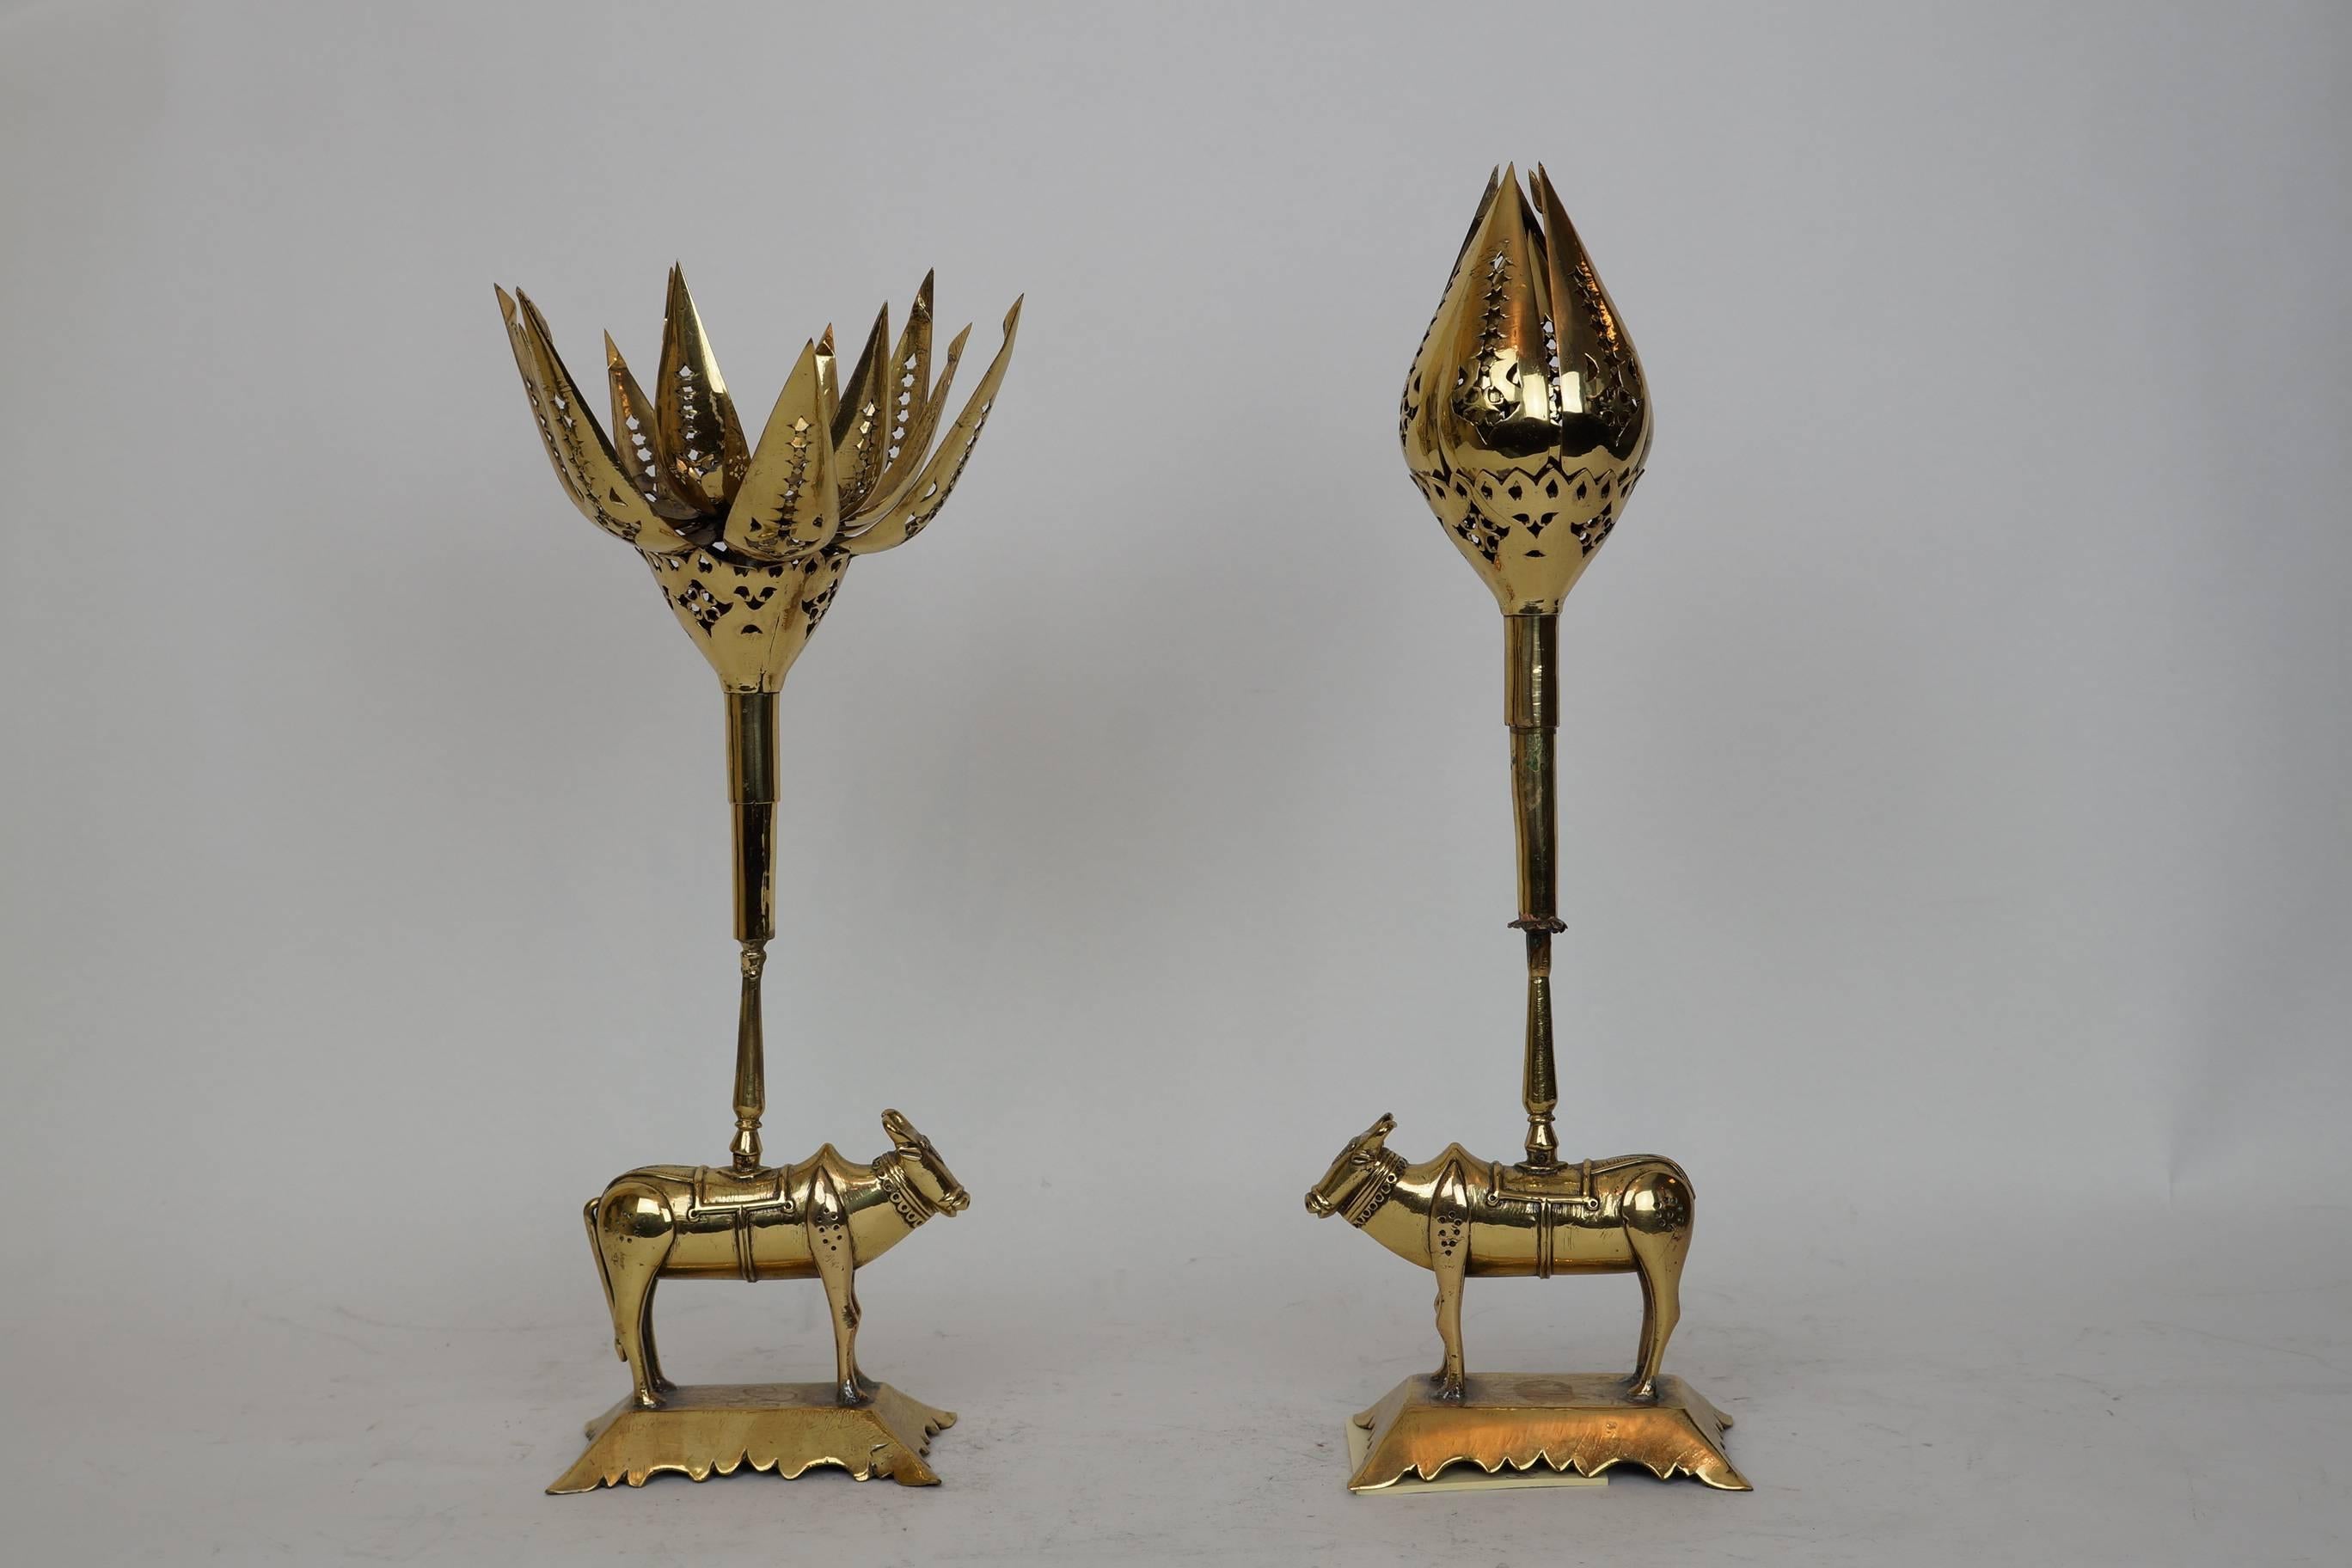 Unusual pair of tulip form brass candleholders mounted on pair of standing bulls.
Stock Number: DA145